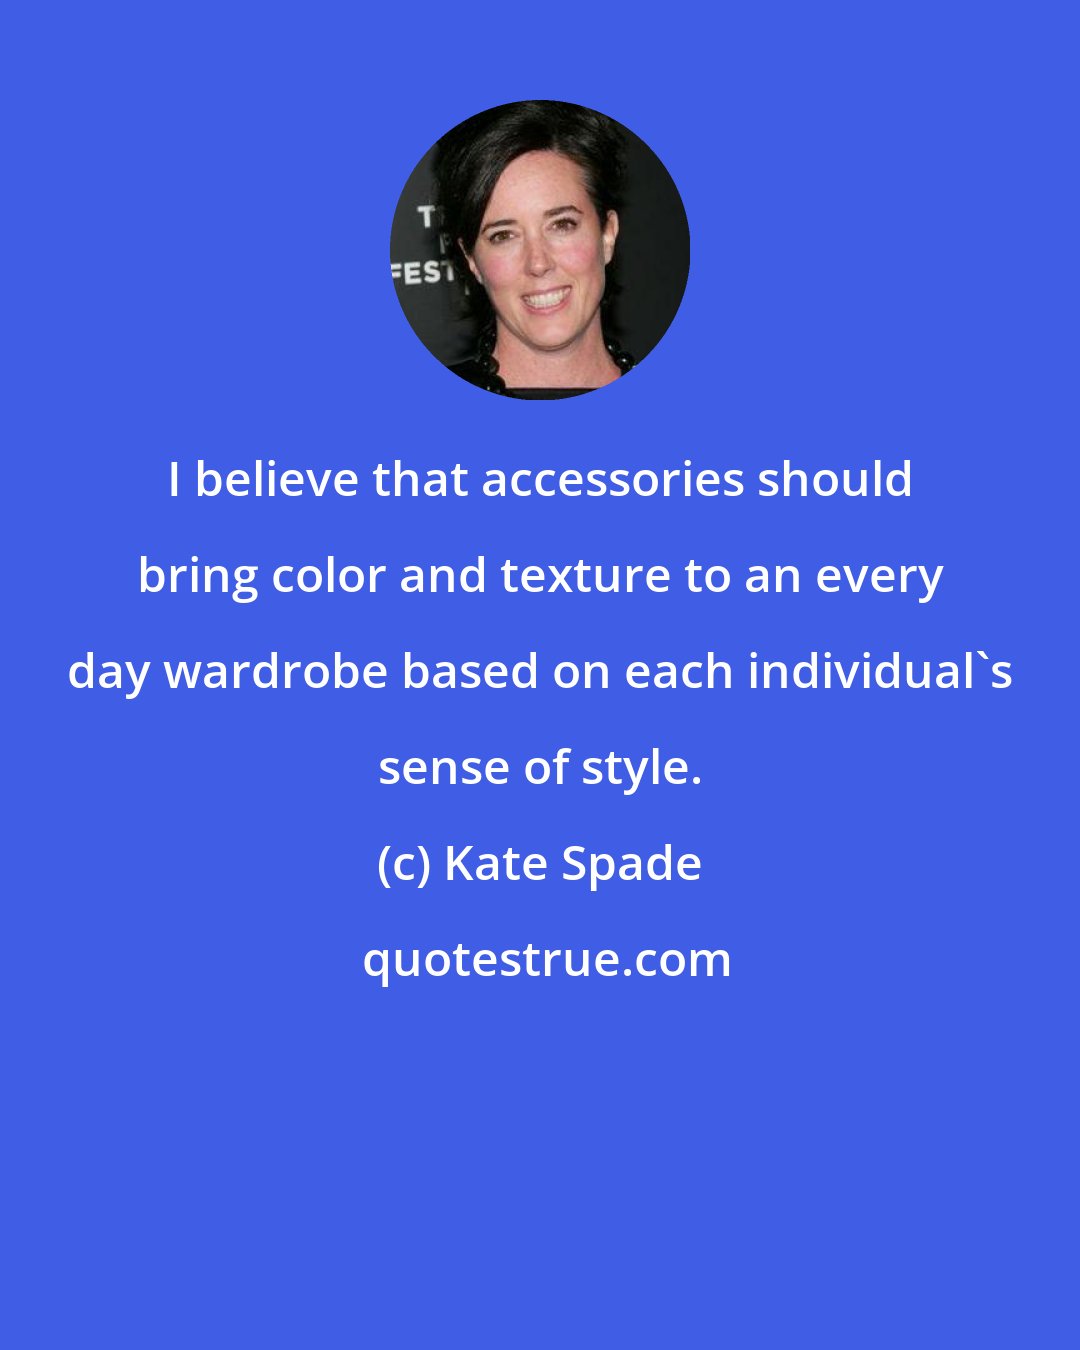 Kate Spade: I believe that accessories should bring color and texture to an every day wardrobe based on each individual's sense of style.